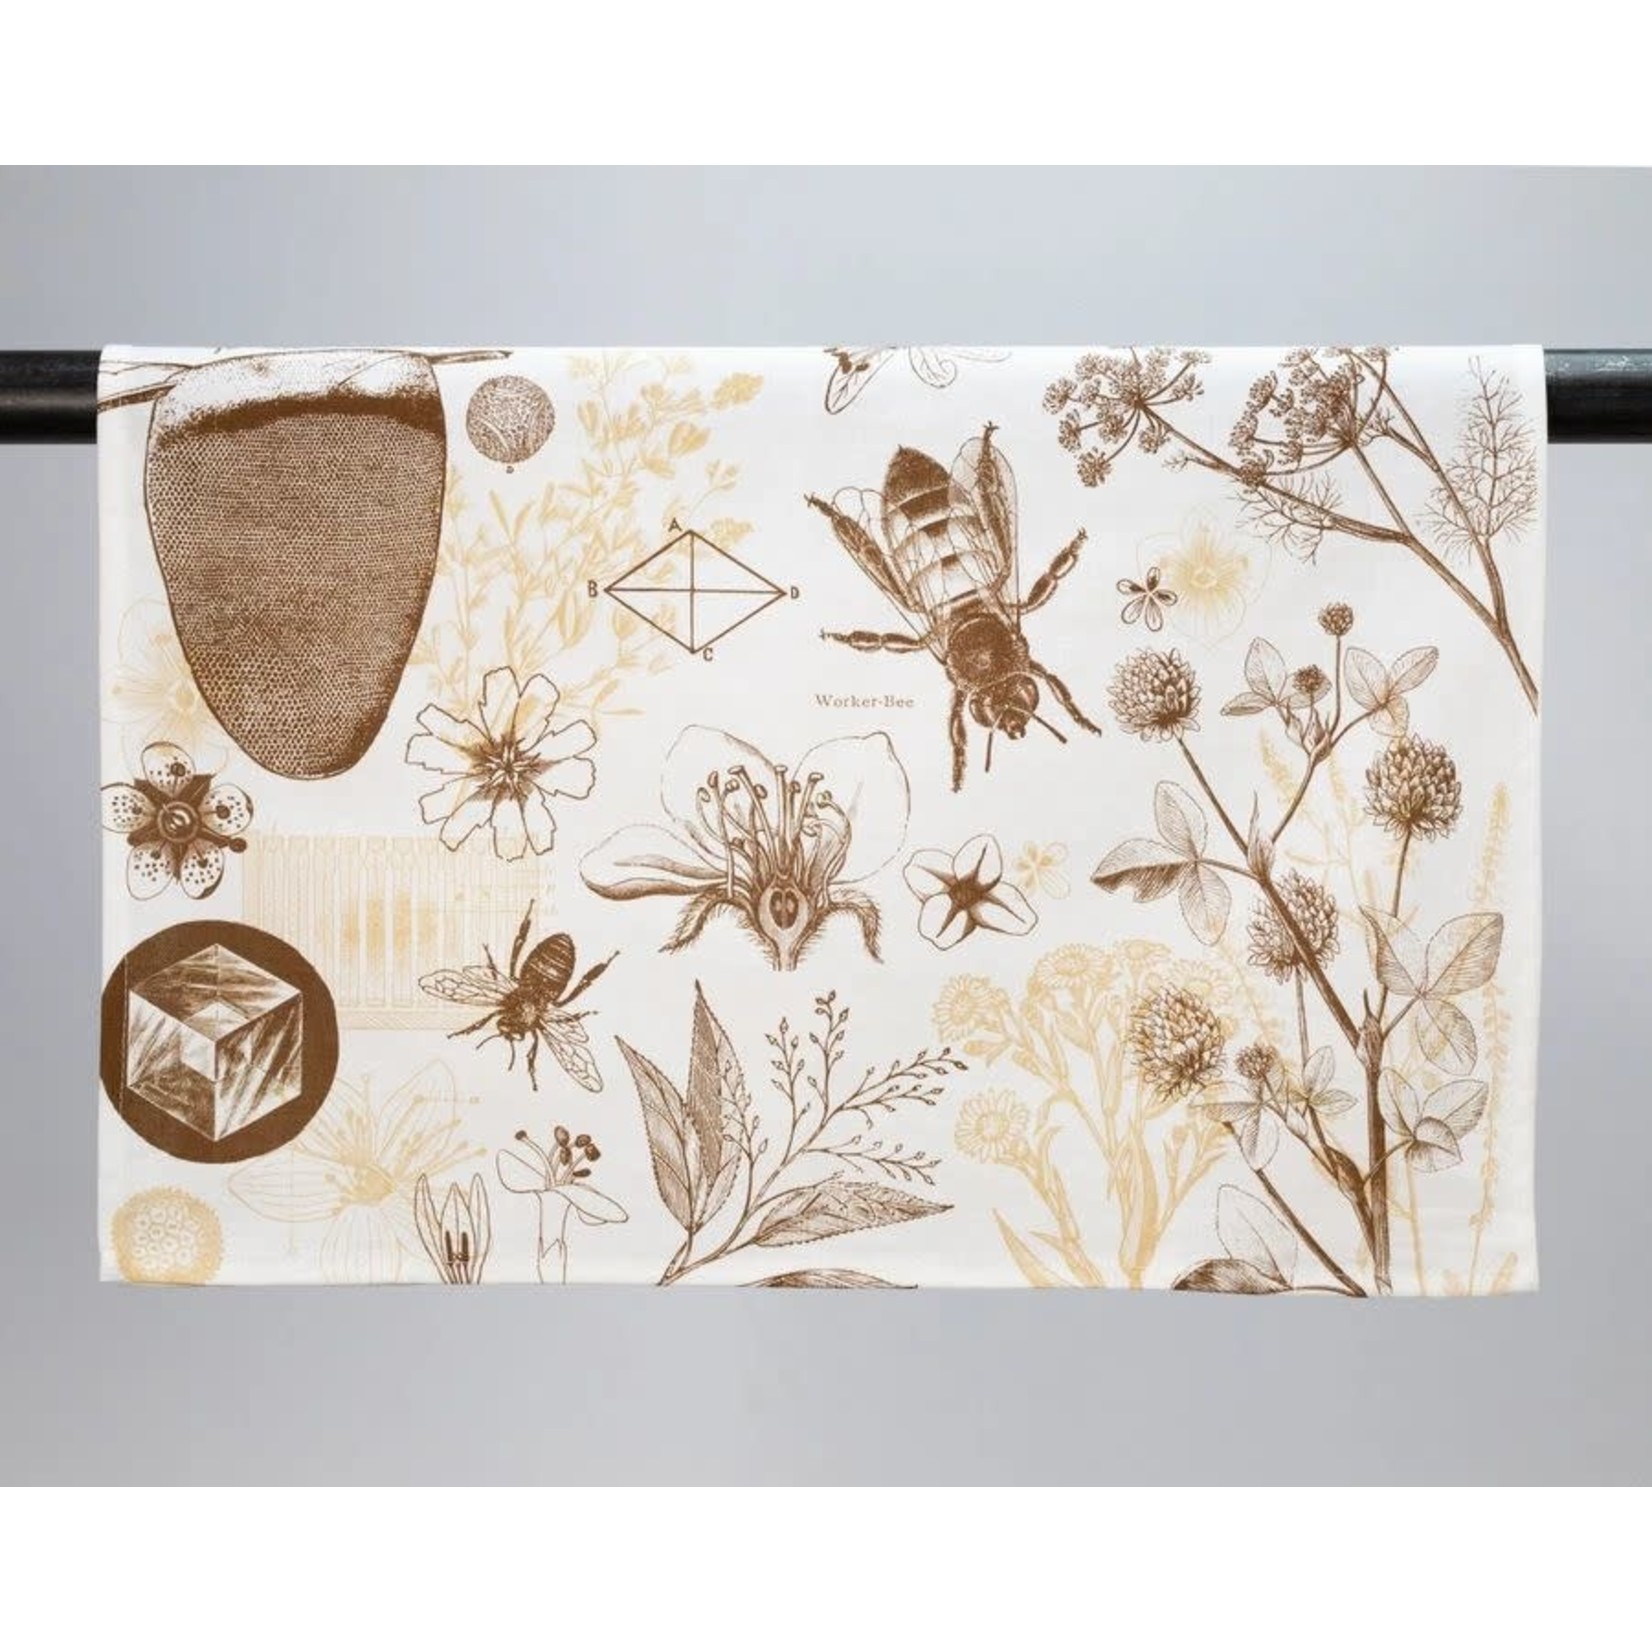 Agriculture and Food Tea Towel Honey Bee Printed